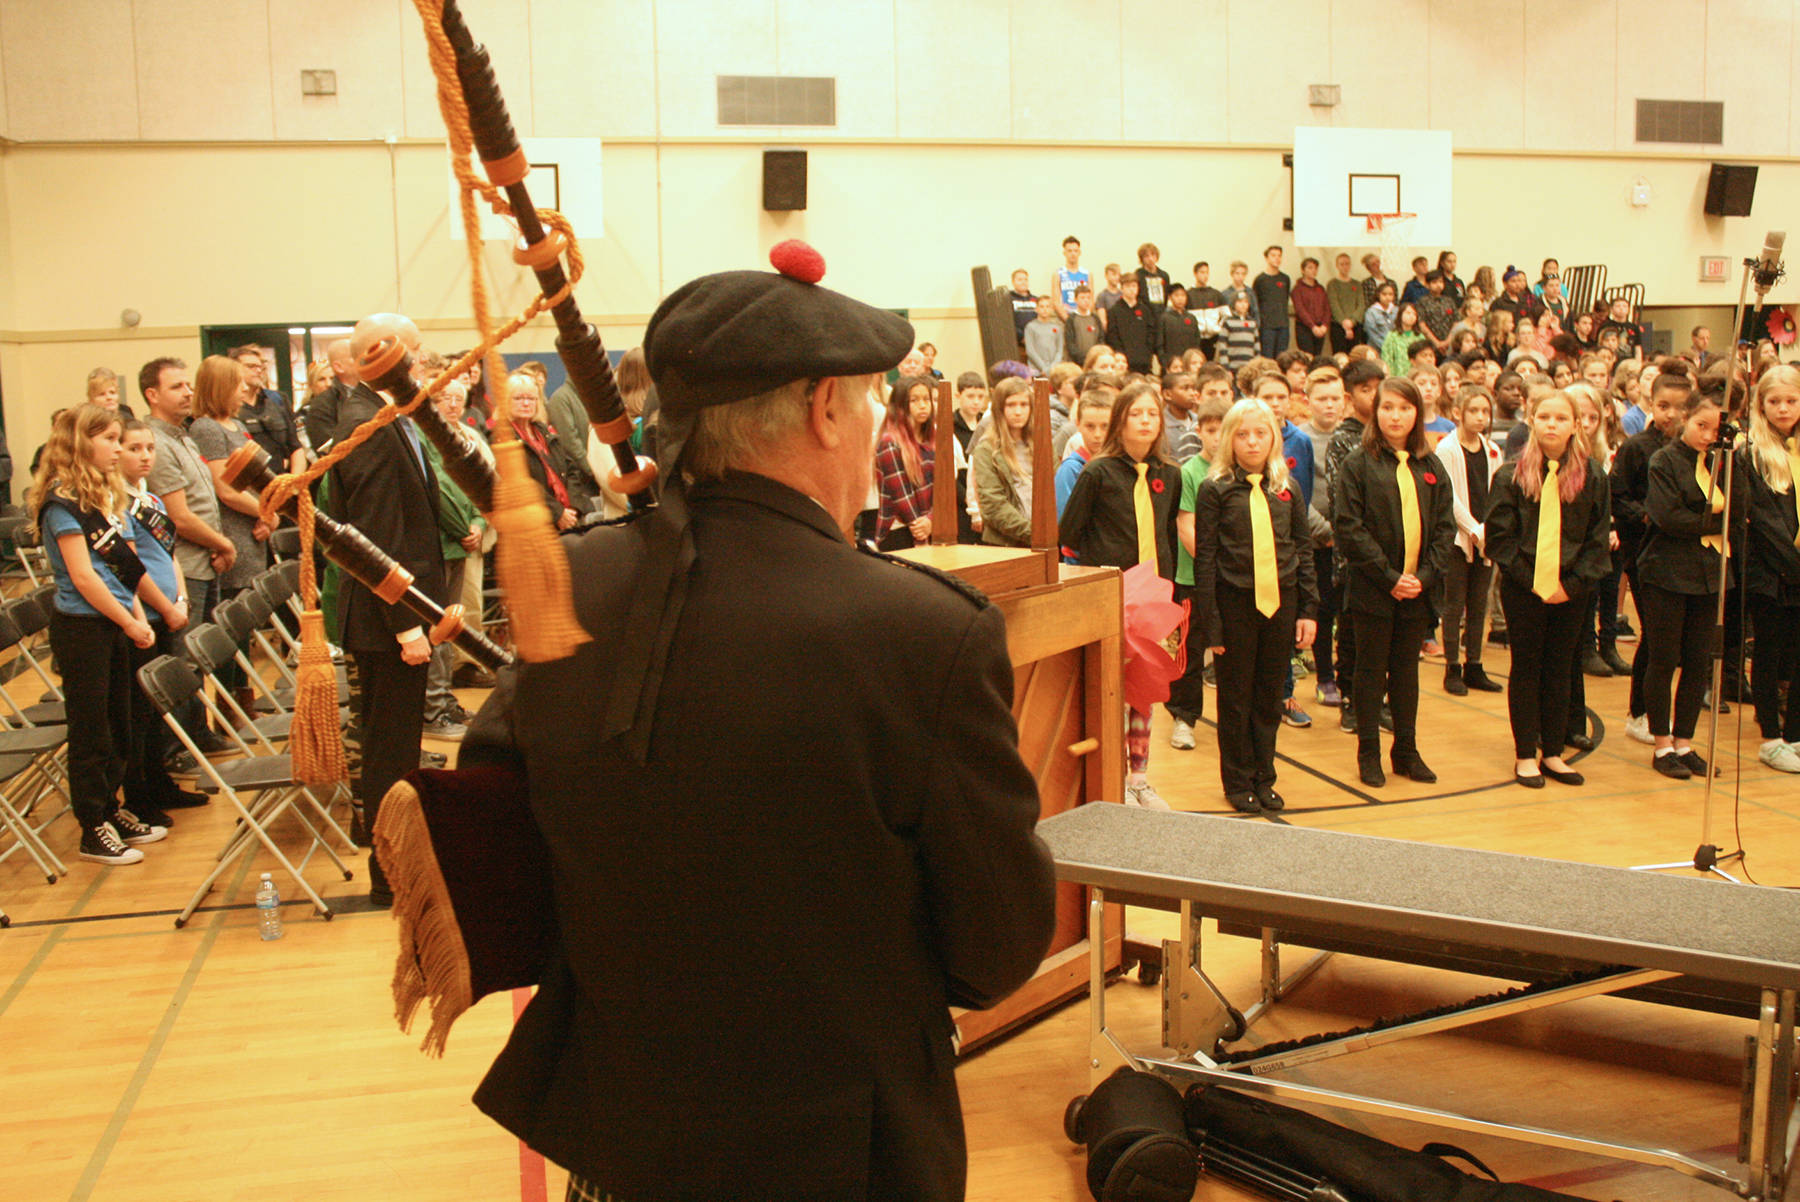 9332771_web1_171117-sne-remembrance-day-glanford-middle-school_3